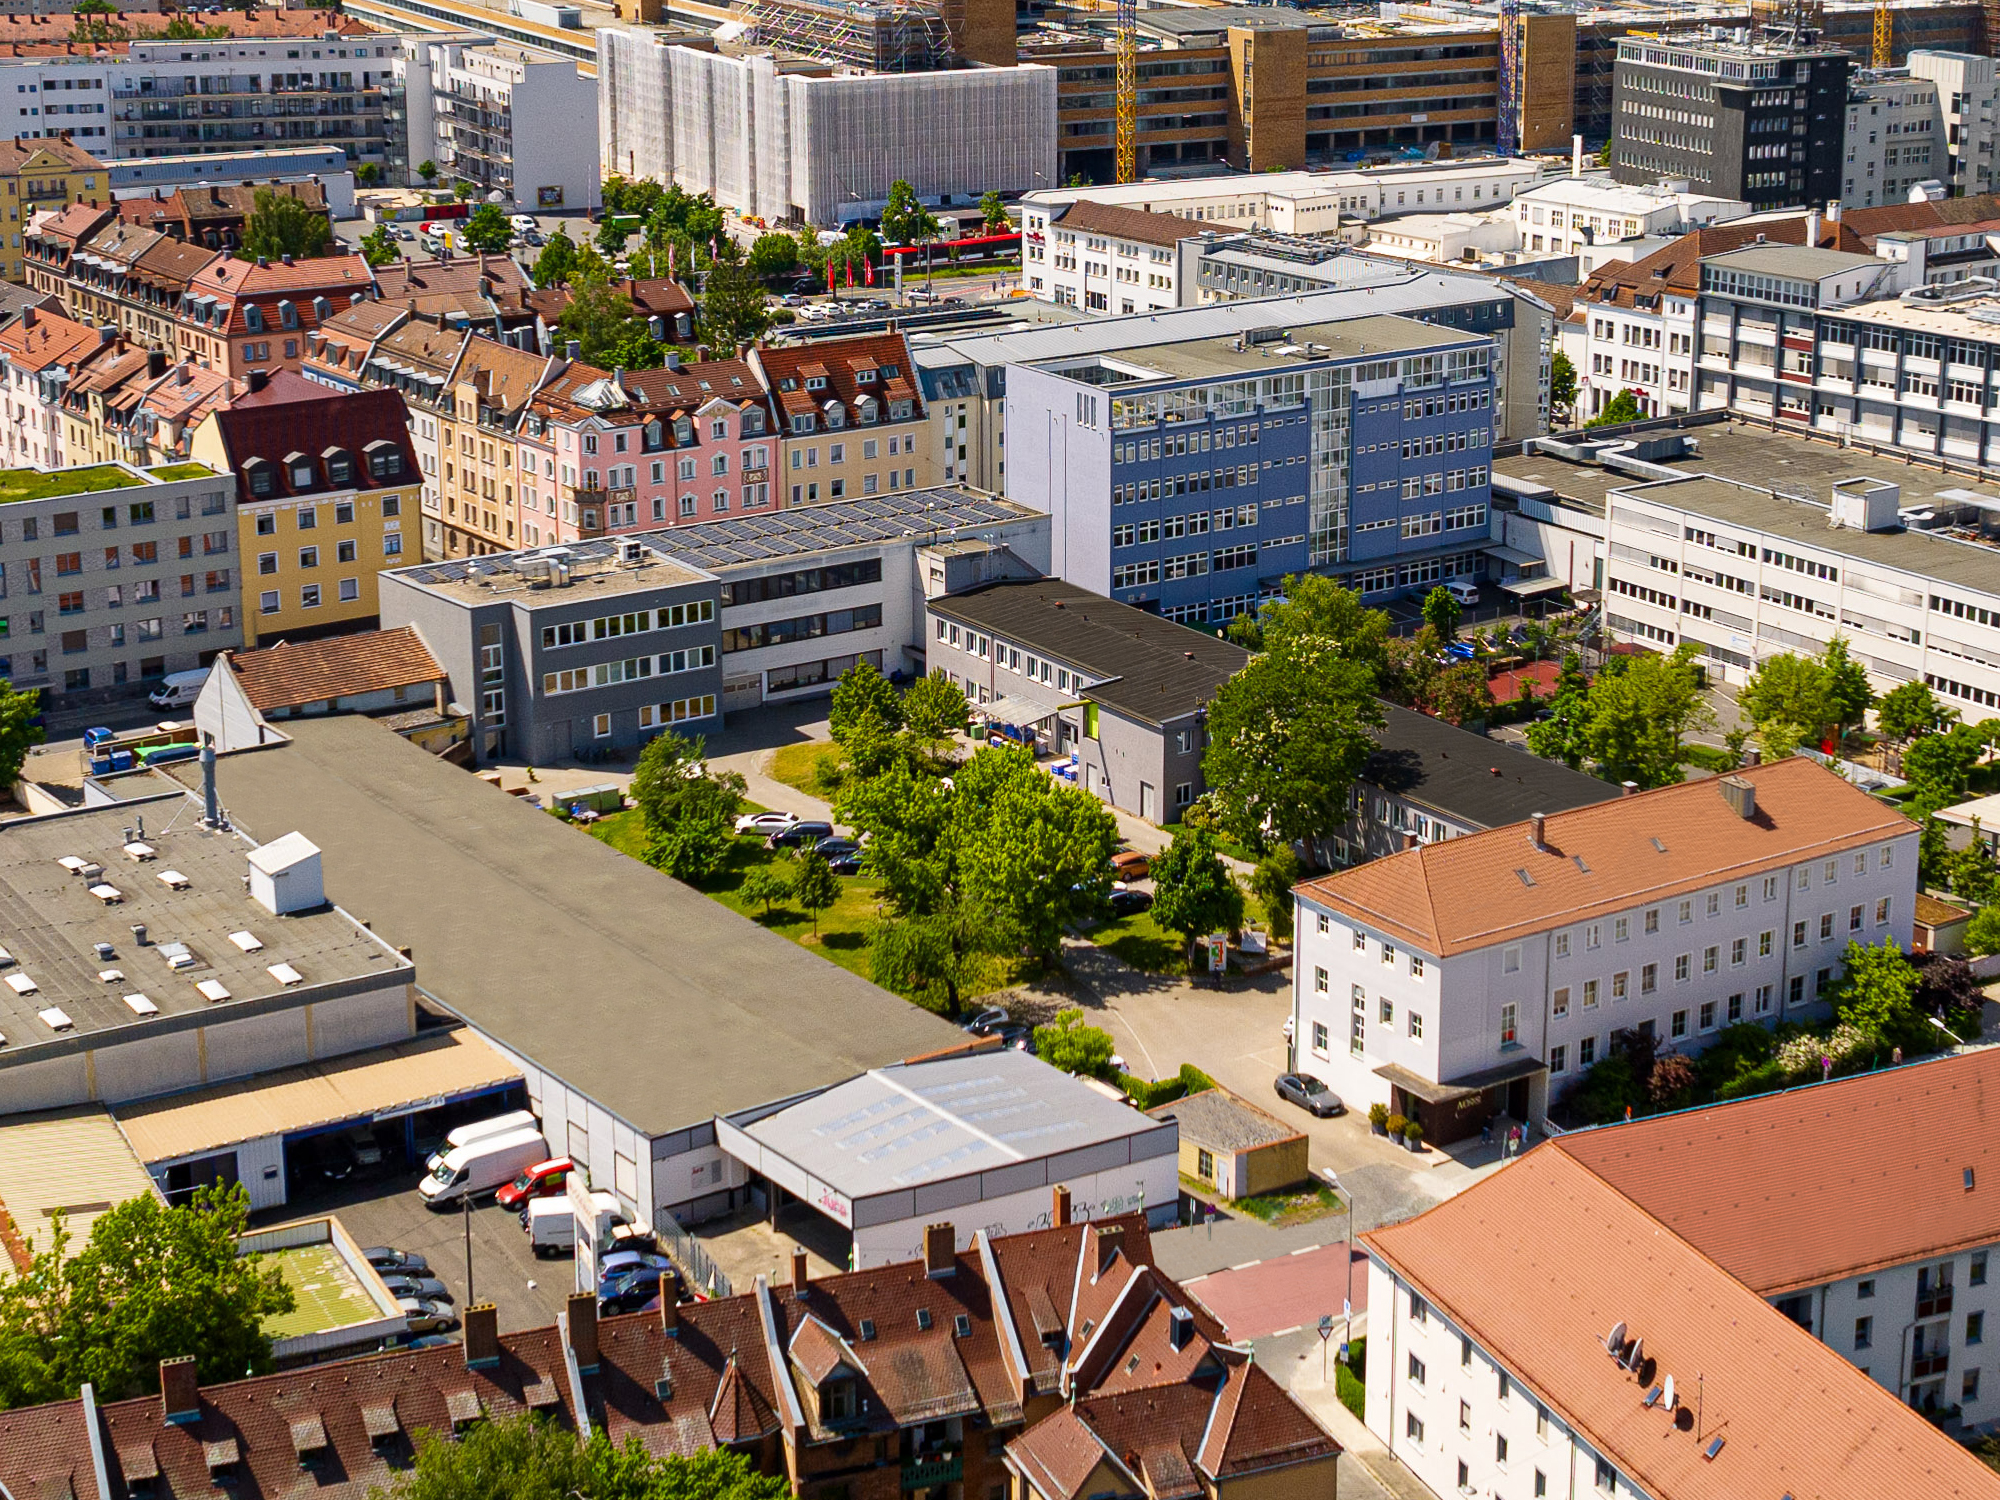 The image shows a drone view from the headquarters of Noris Group Nuremberg